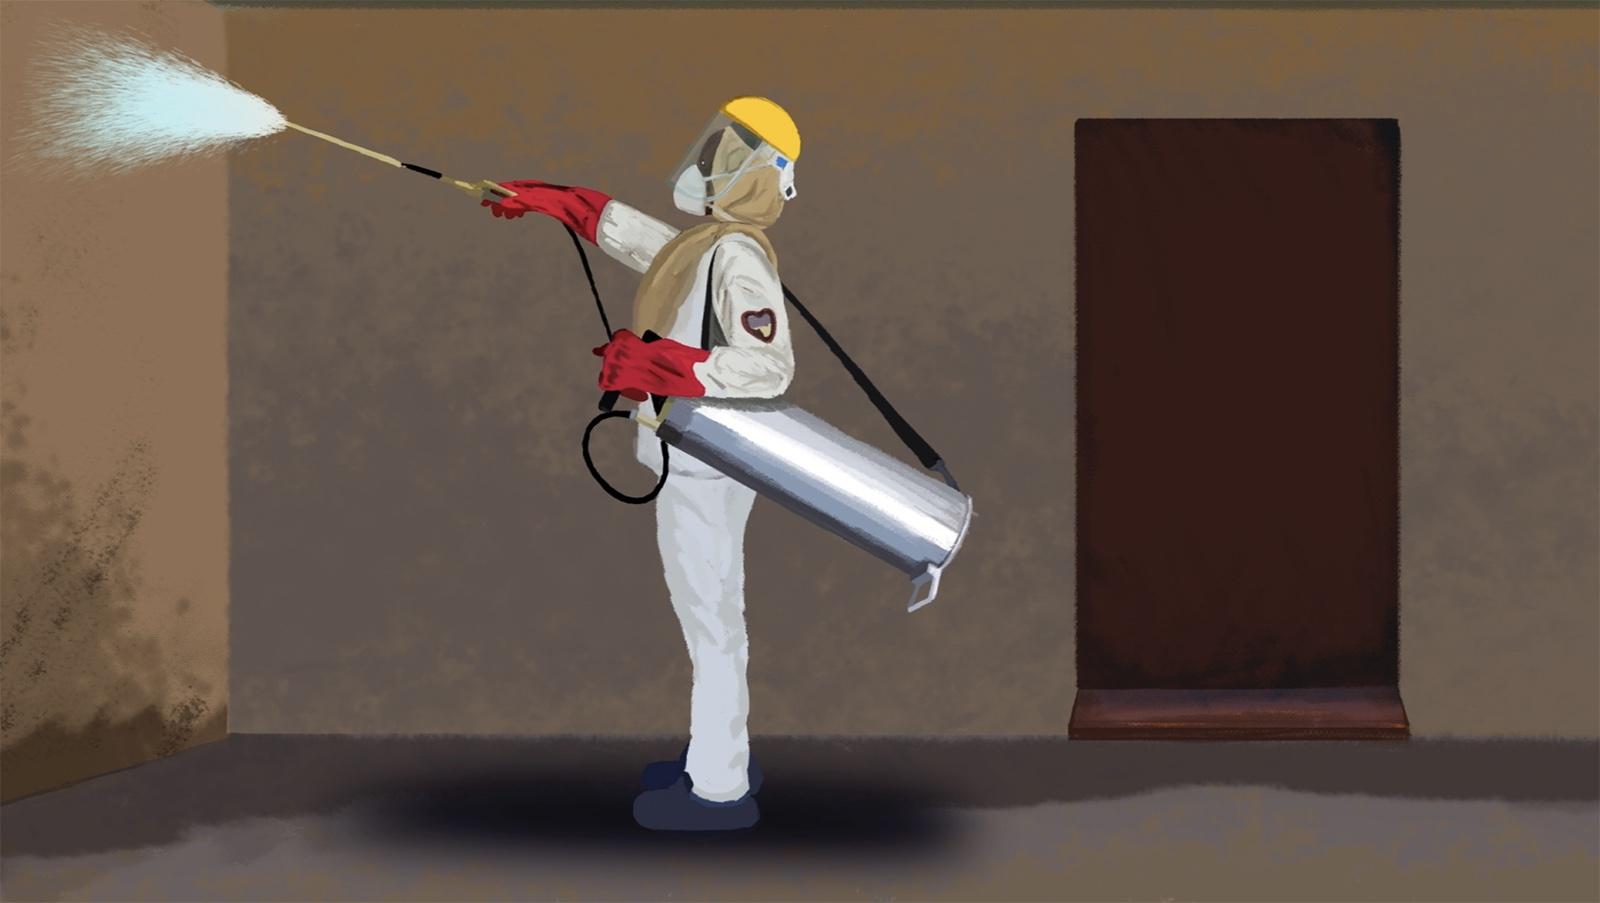 Person wearing protective gear, carrying a canister of insecticide spray, spraying the indoor walls of a house